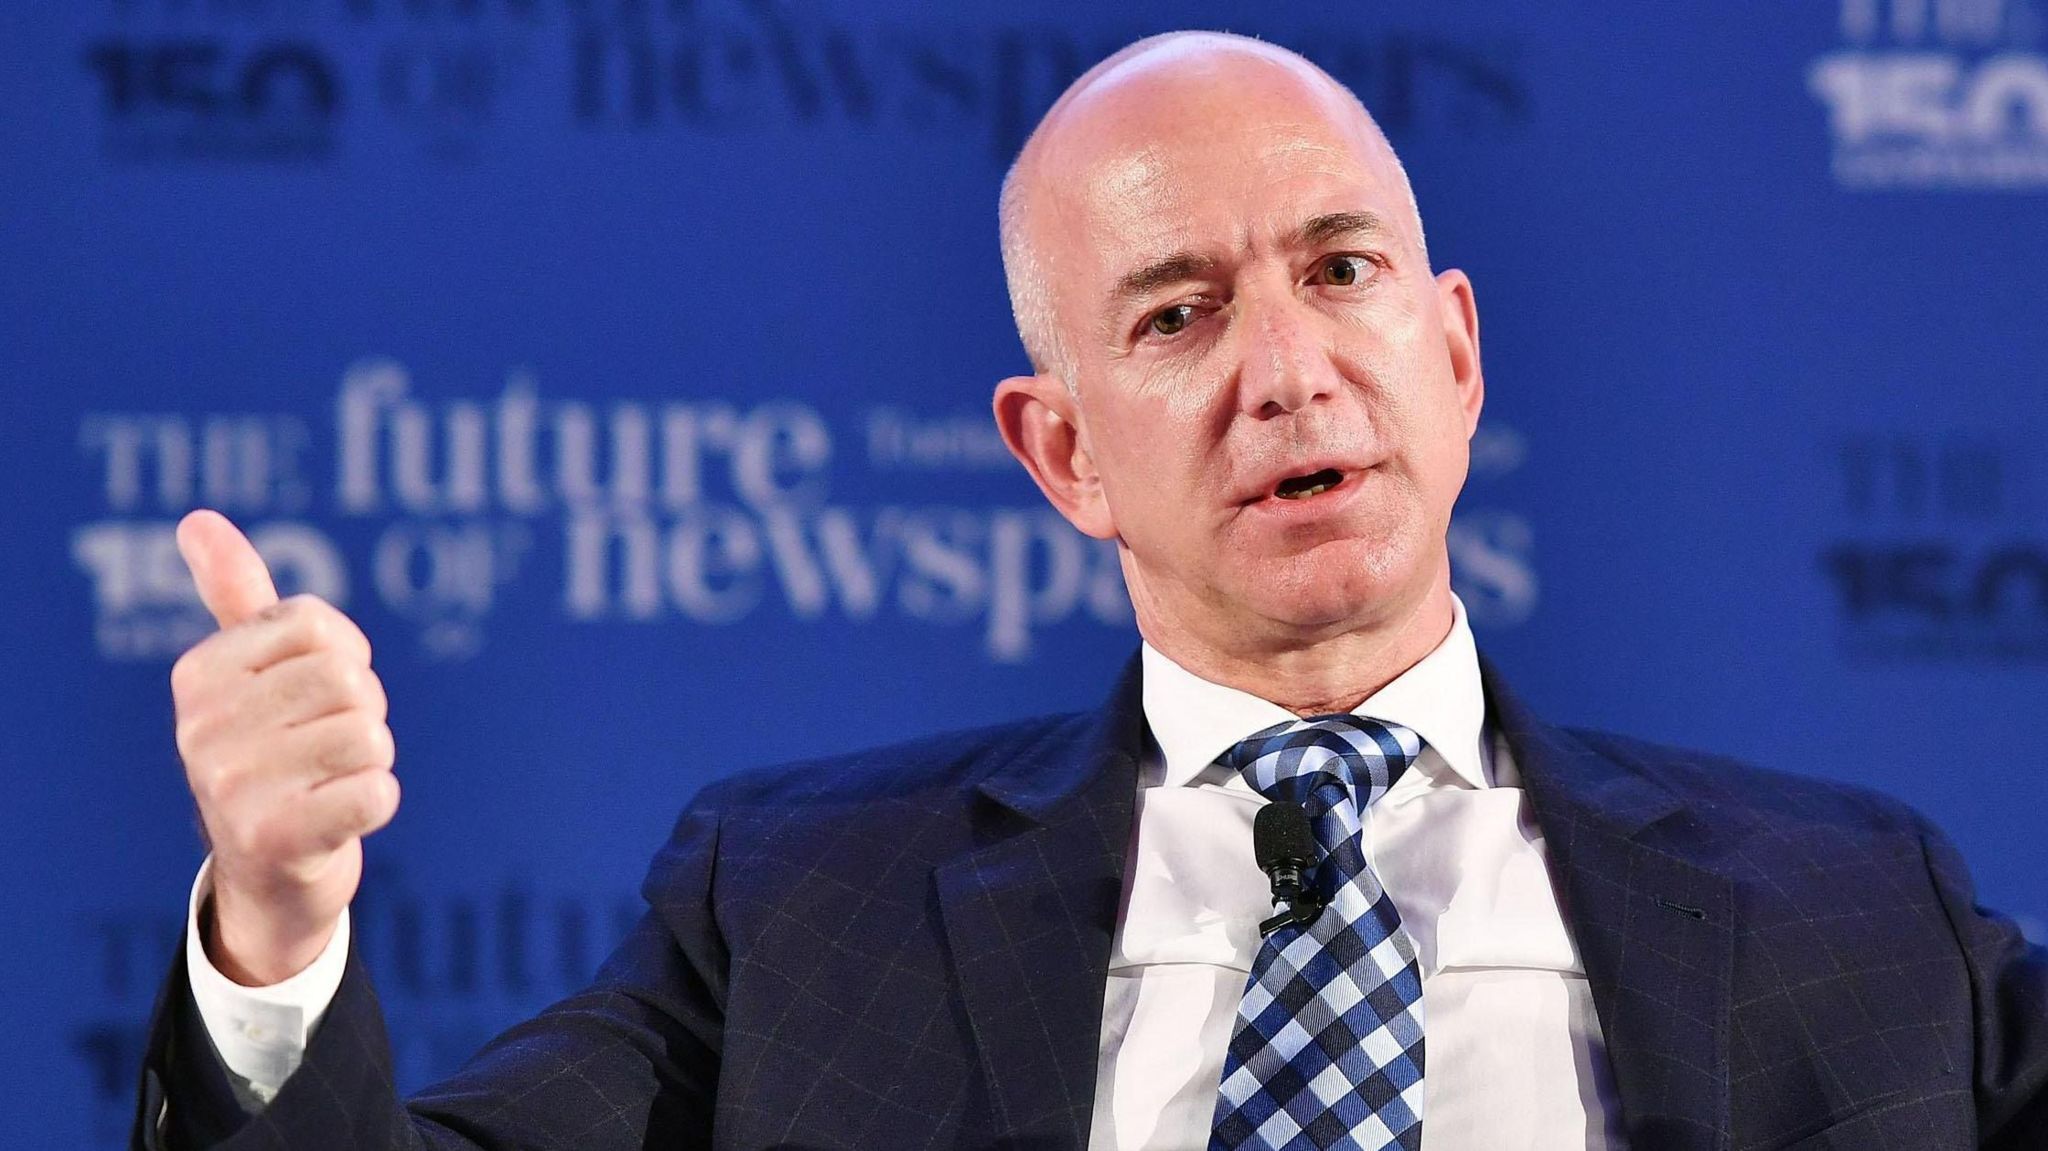 Jeff Bezos, Founder of Amazon, during the conference "The Future of Newspapers"